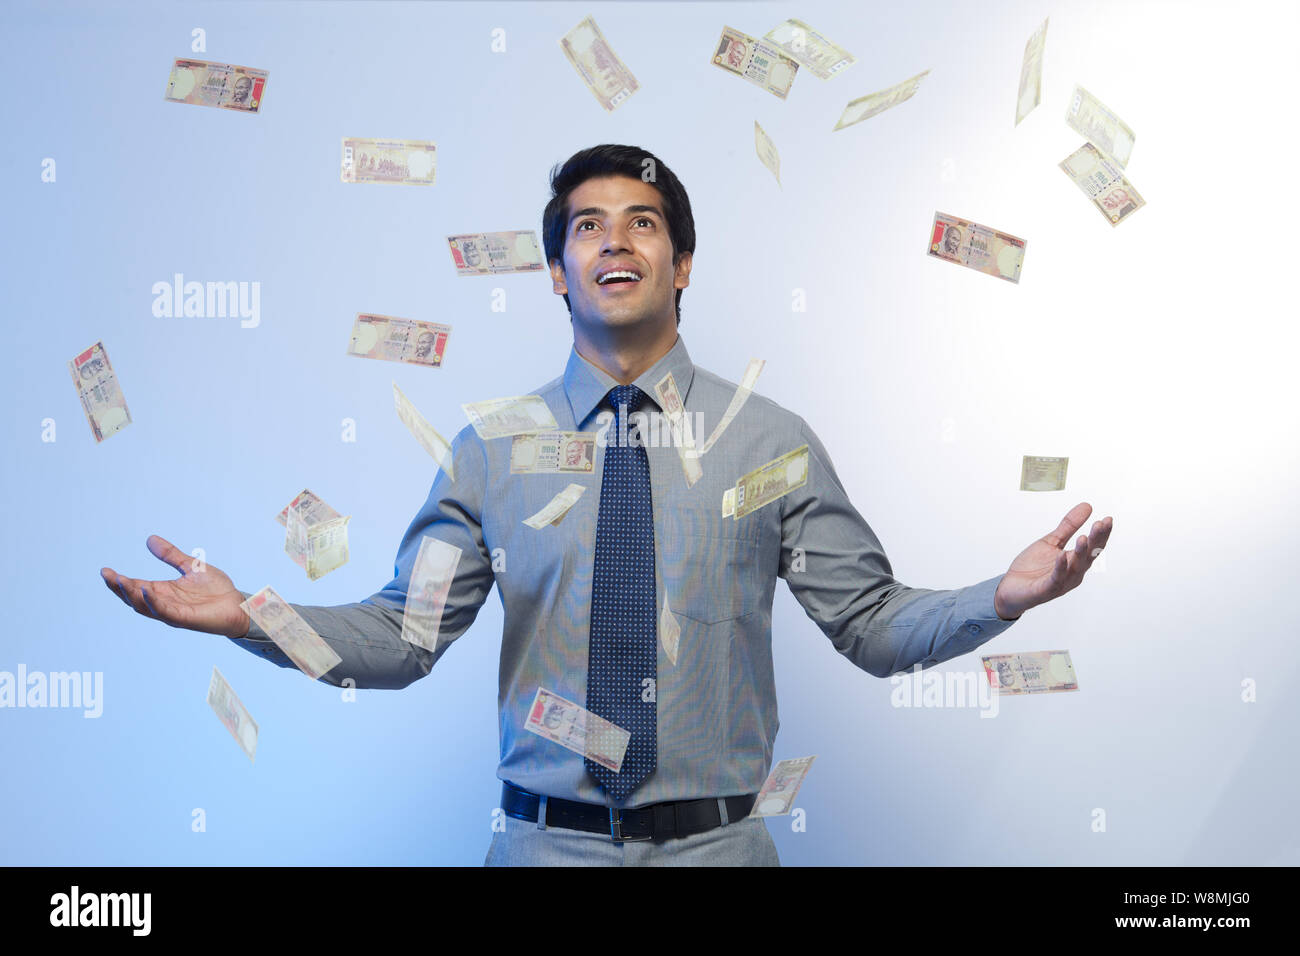 Money falling on a businessman standing with his arms outstretched Stock Photo